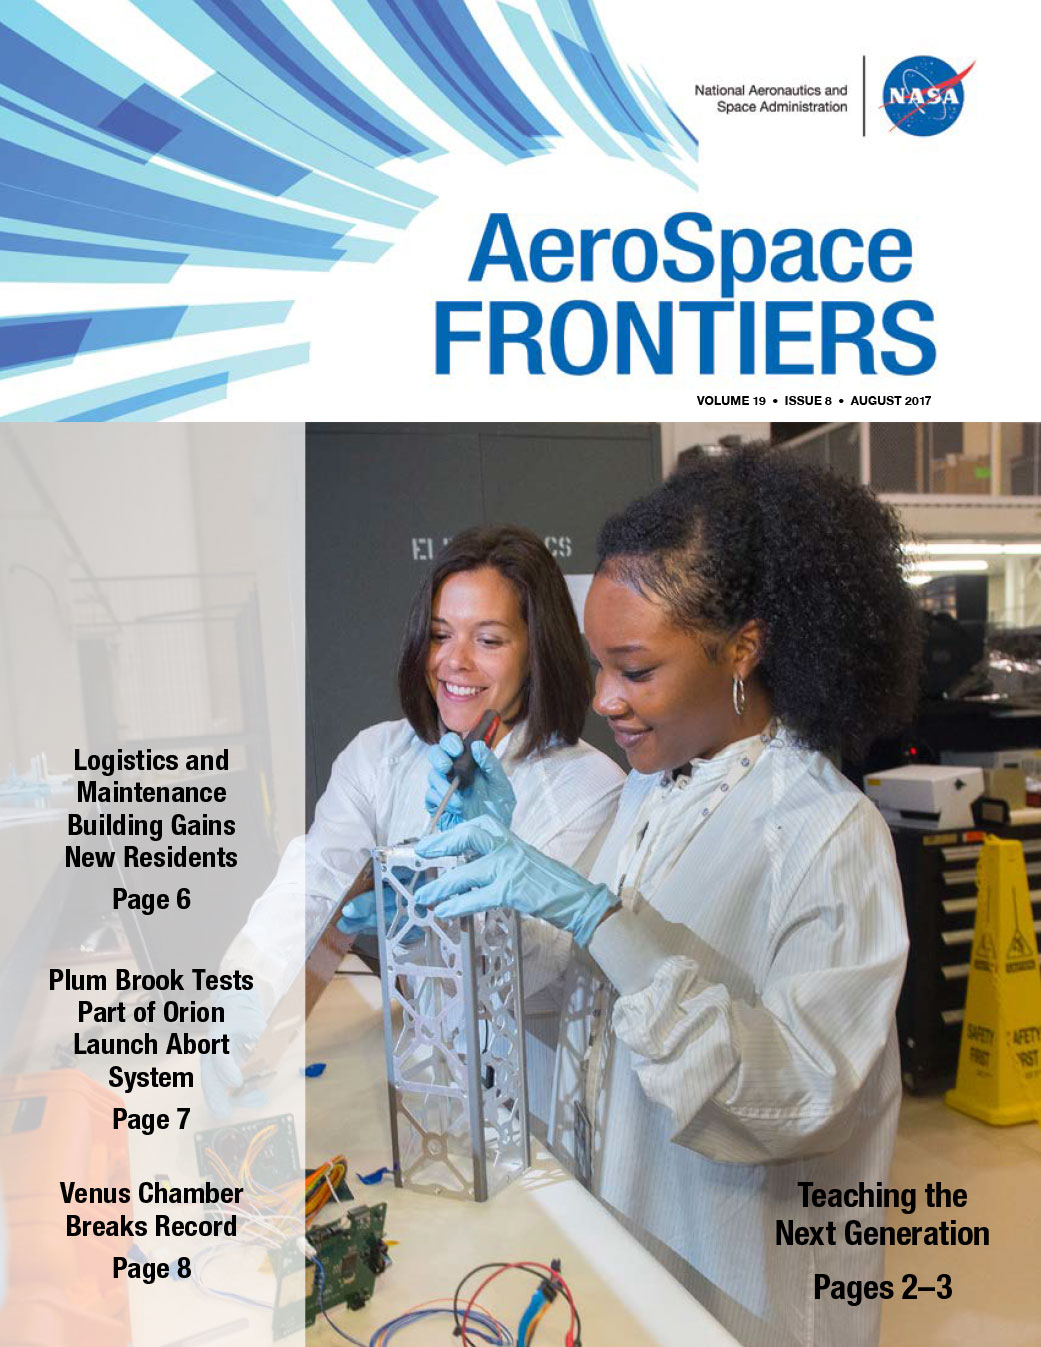 Cover of the August 2017 issue of AeroSpace Frontiers featuring the updated design.